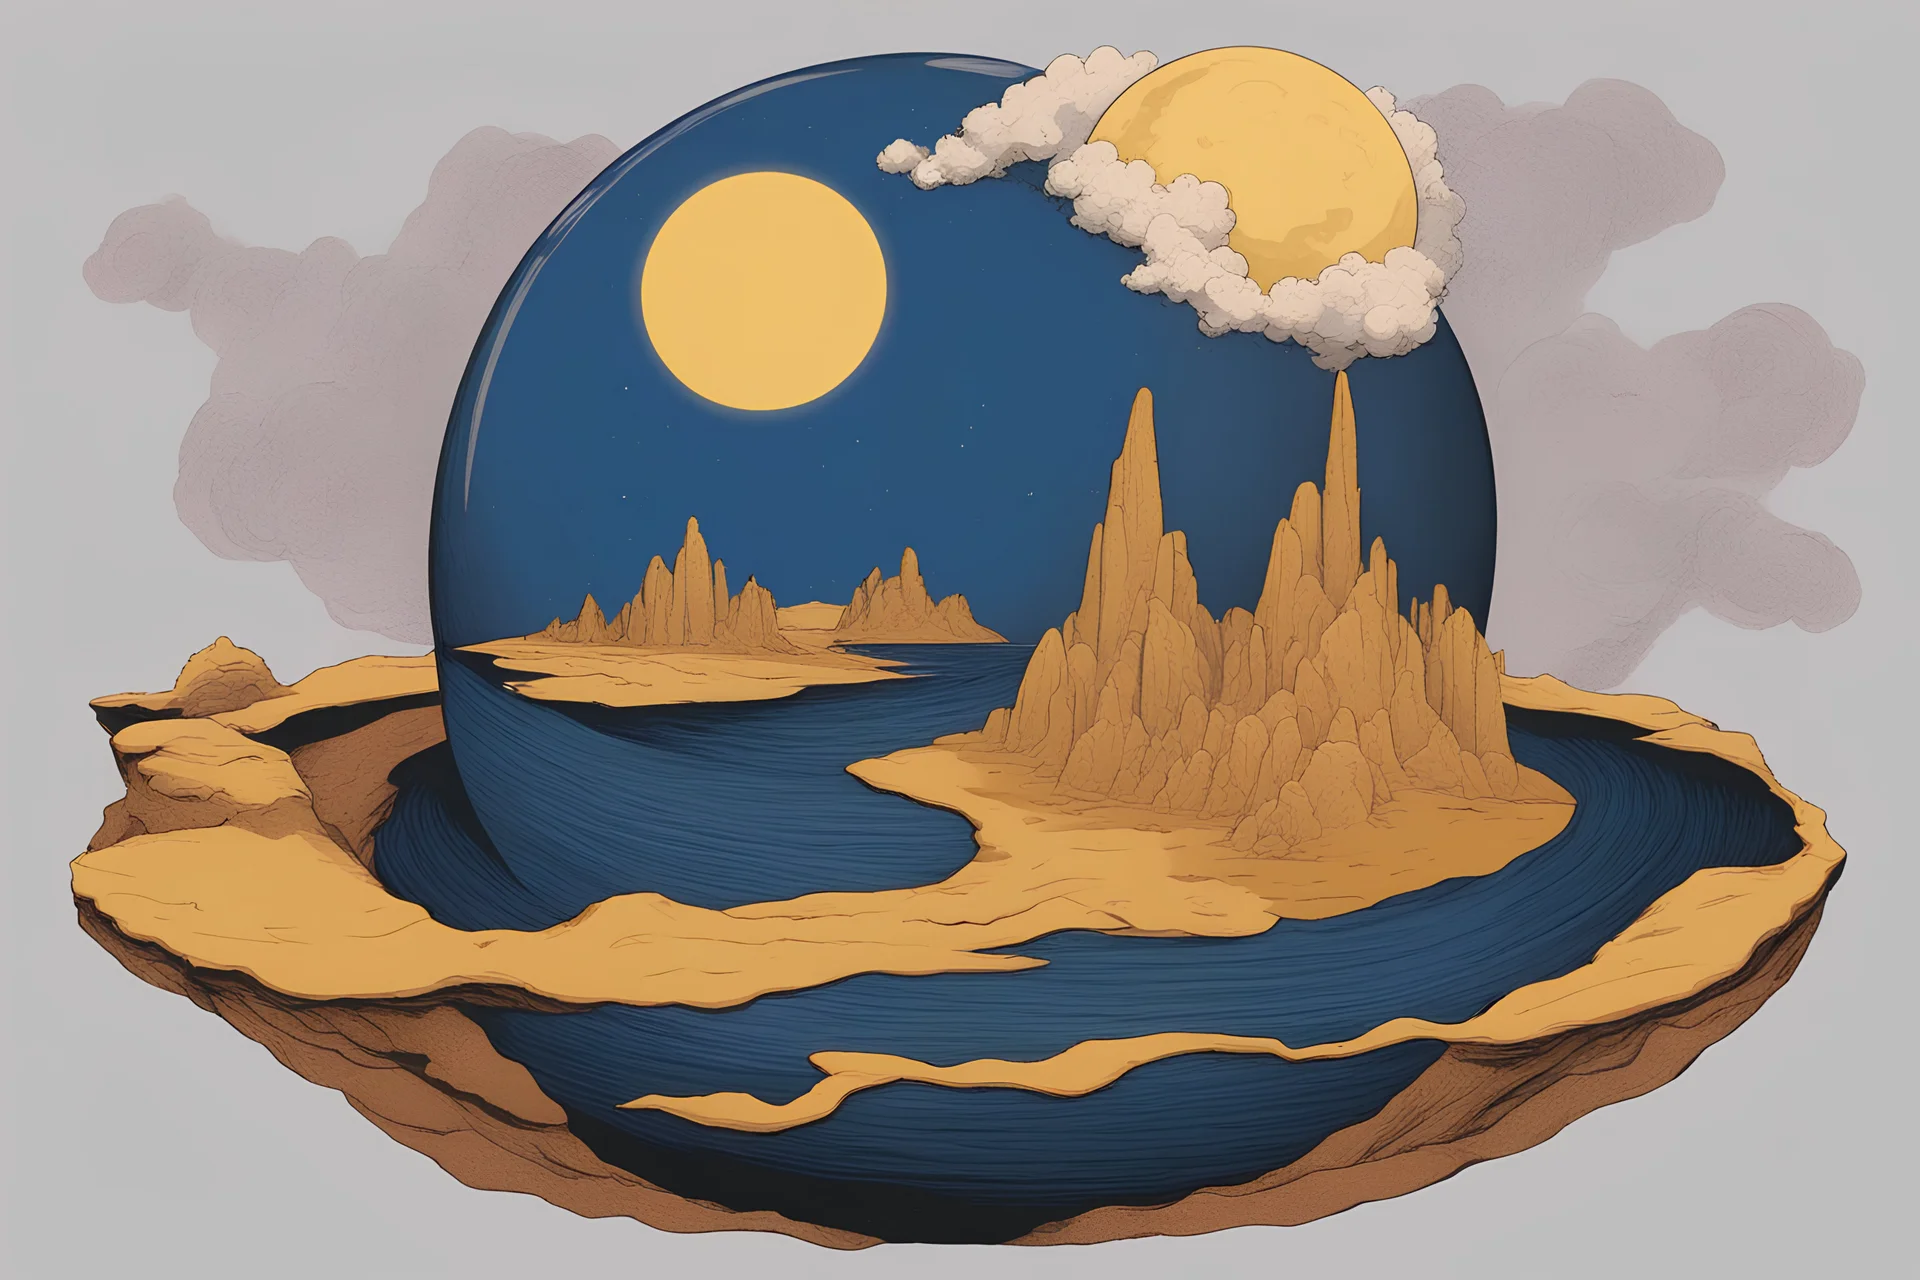 image of a blue and yellow globe with clouds, desolate gloomy planet, arid planet, mar planet, weird planet, planet landscape, ocean on planet titan, deserted planet, circular planet behind it, terraformed mars, planet surface, circular planet, rich diverse lush alien world, dark blue planet, an alien planet, ocean on alien planet titan